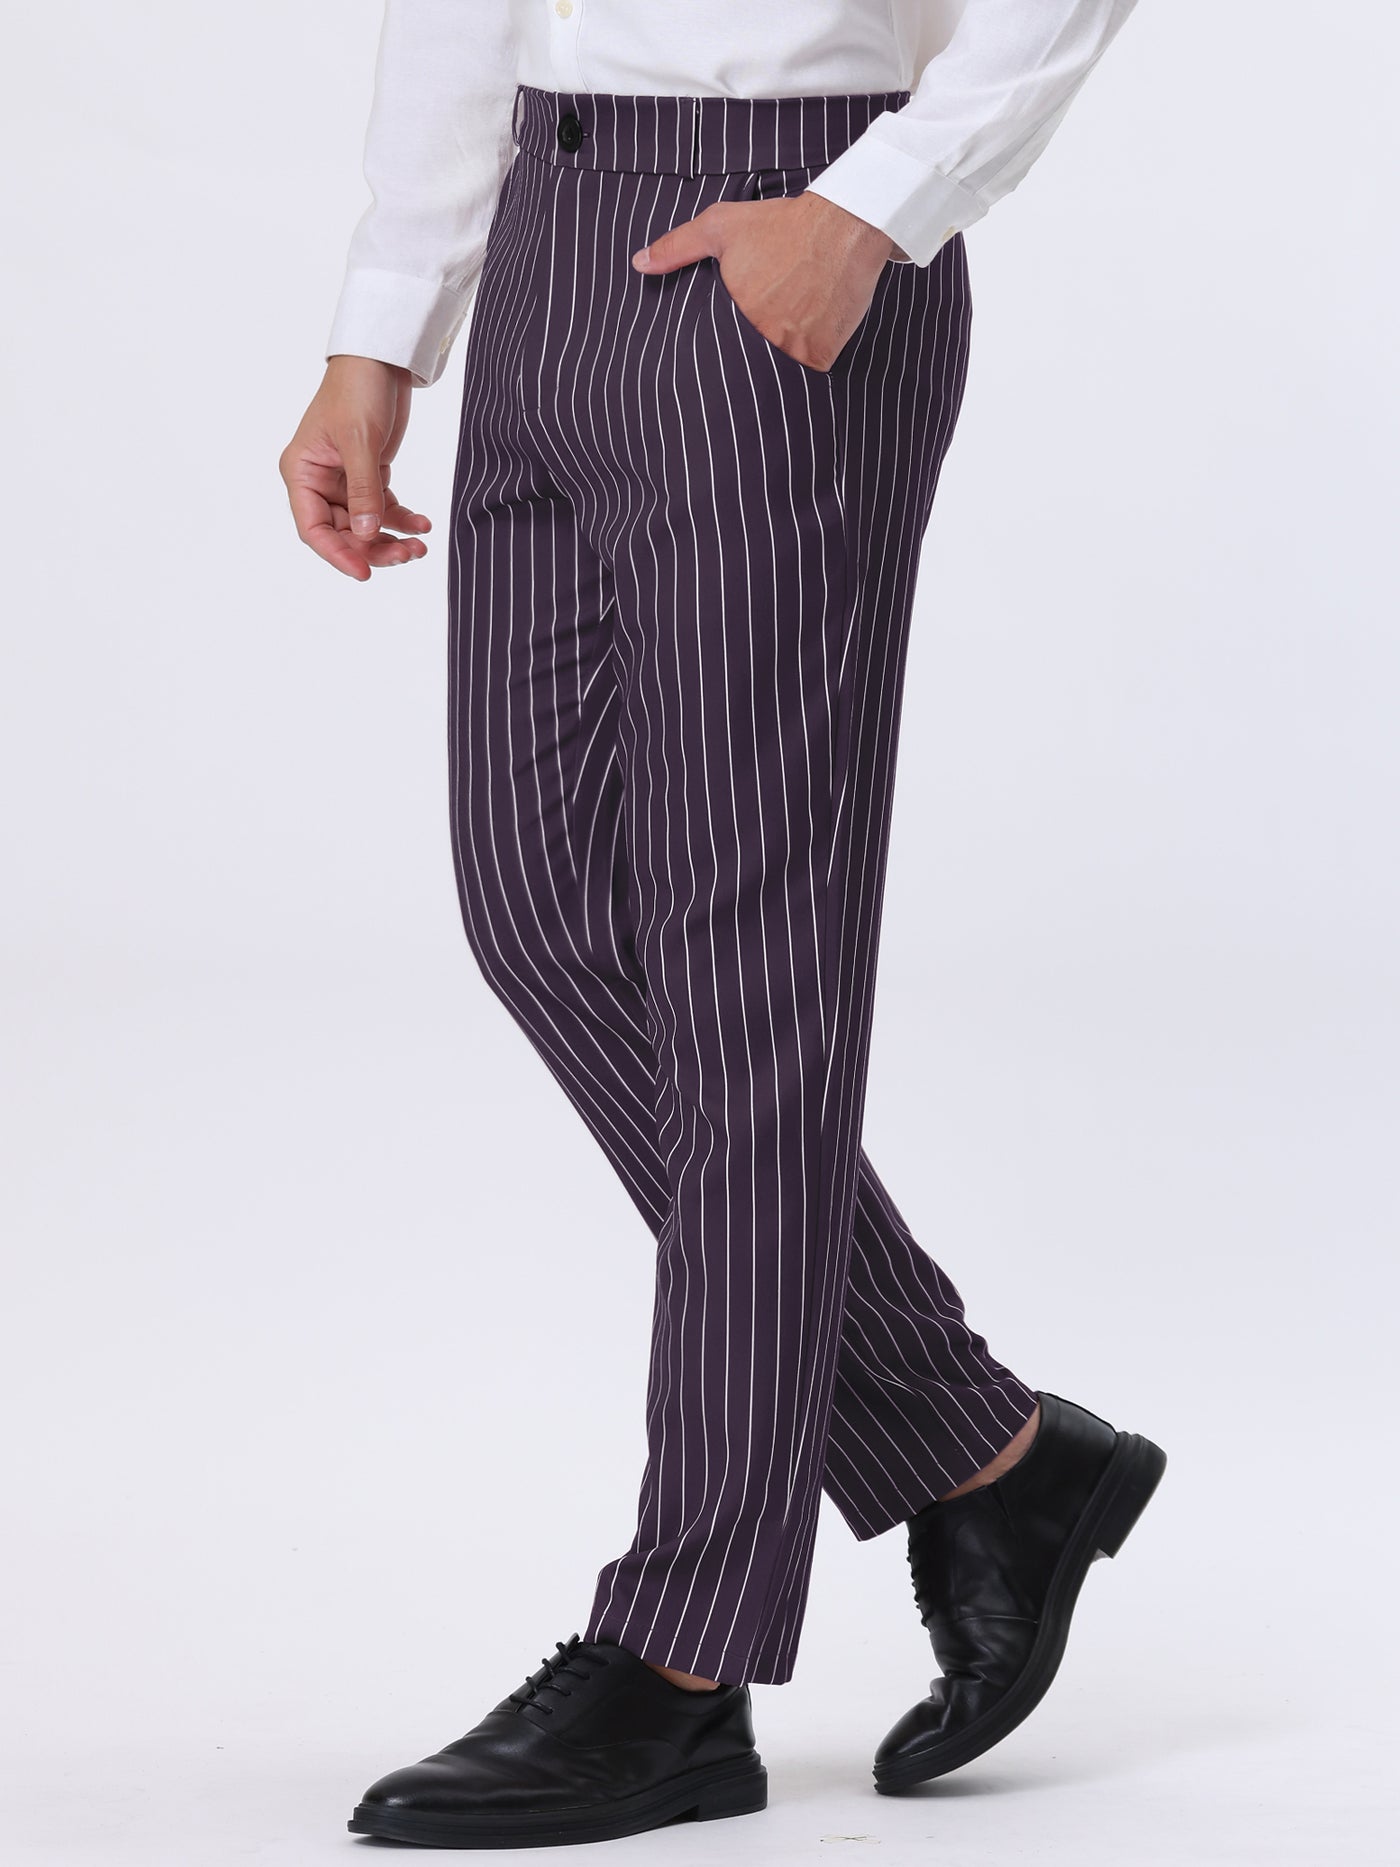 Men's Casual Long Trousers Office Slim Fit Business Fashion Skinny Pants |  eBay